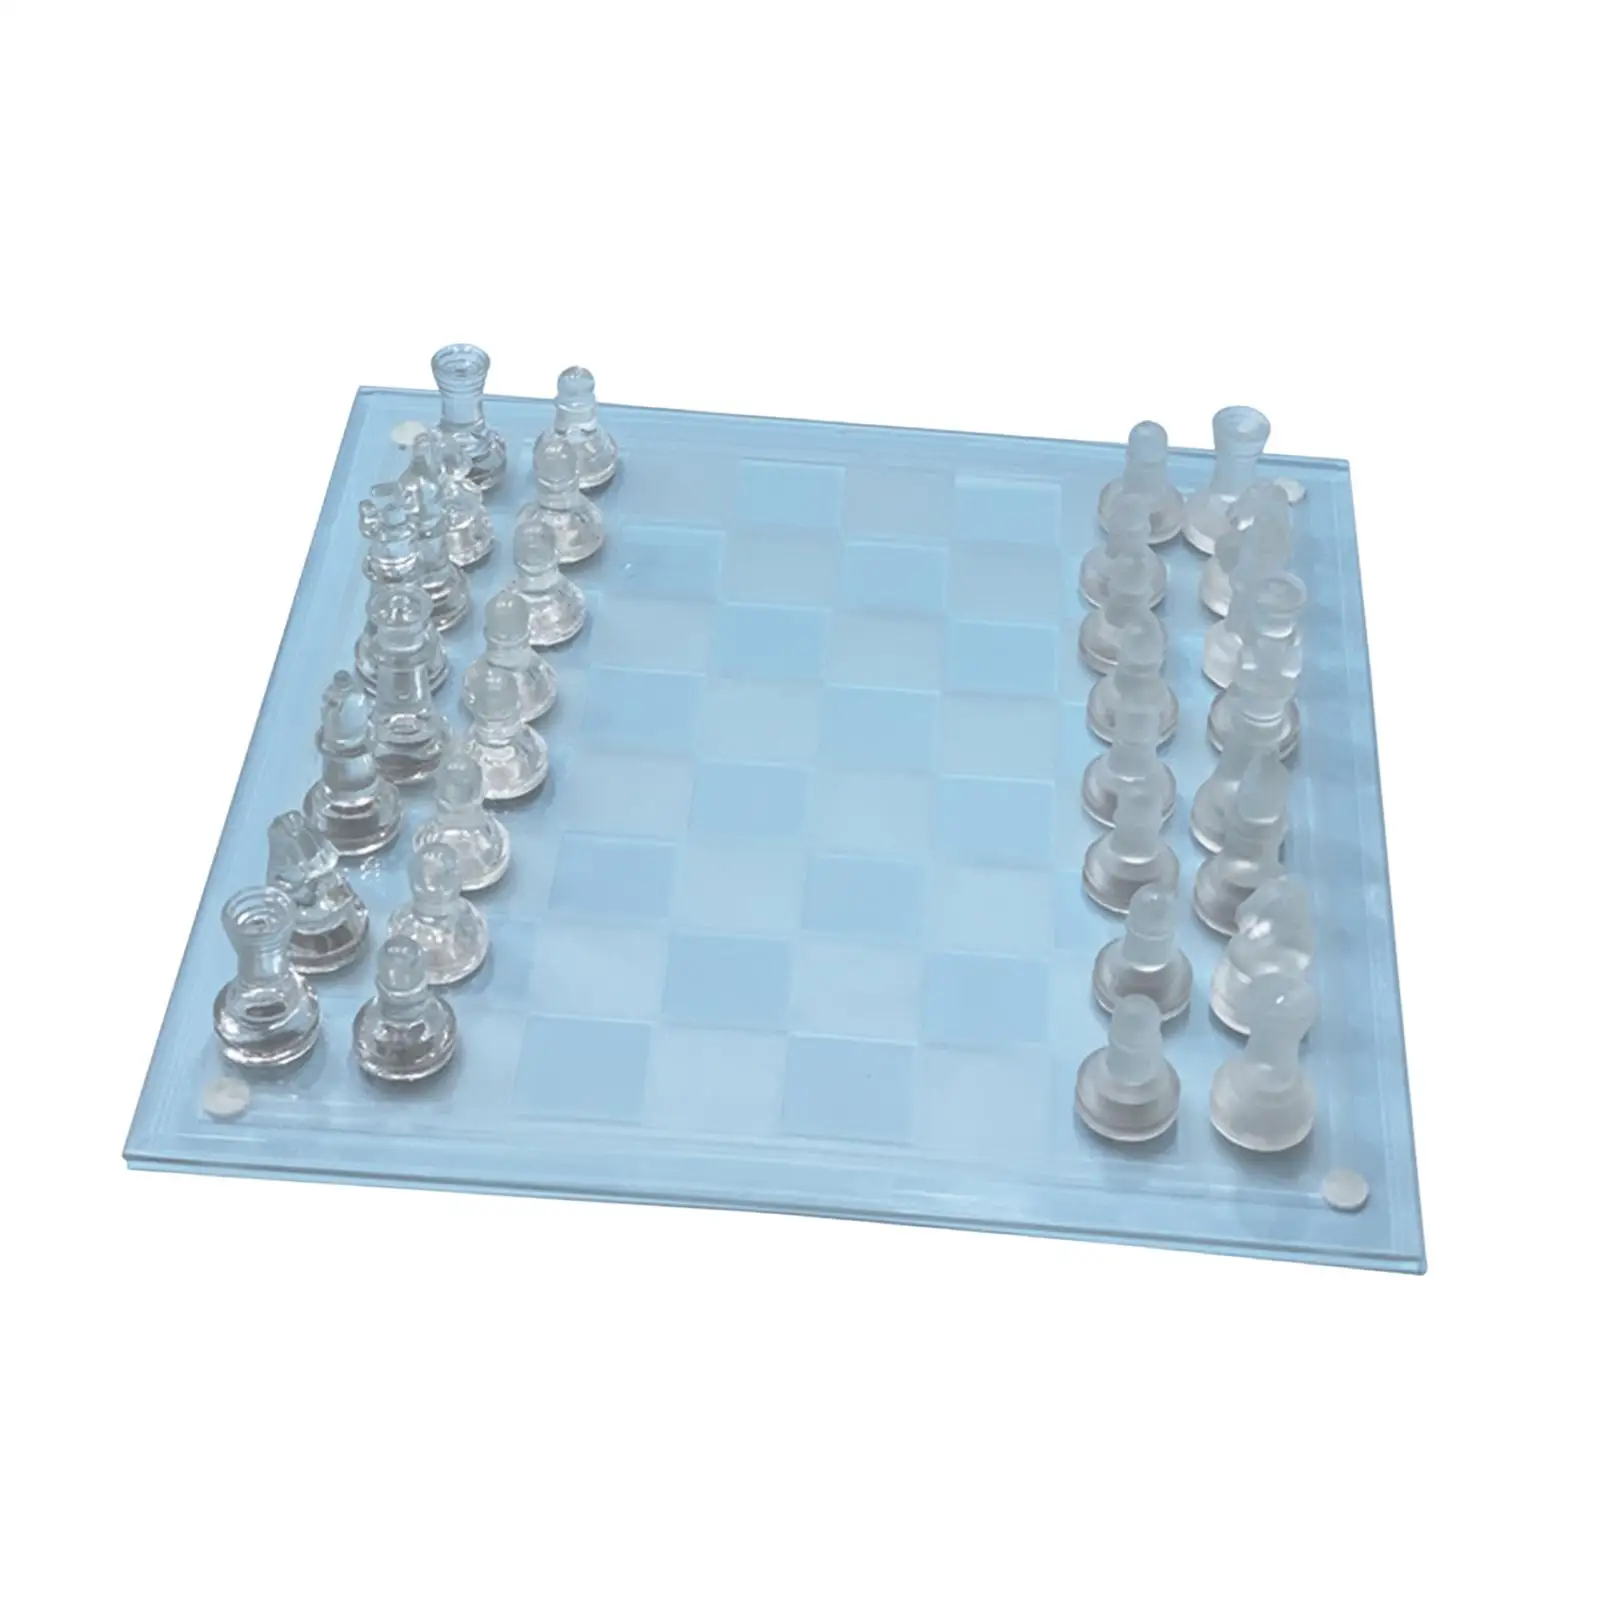 Crystal Chess Board Adults Play Set with Chess Board Table glass Chess Game for Game Interaction Gift Activity Leisure